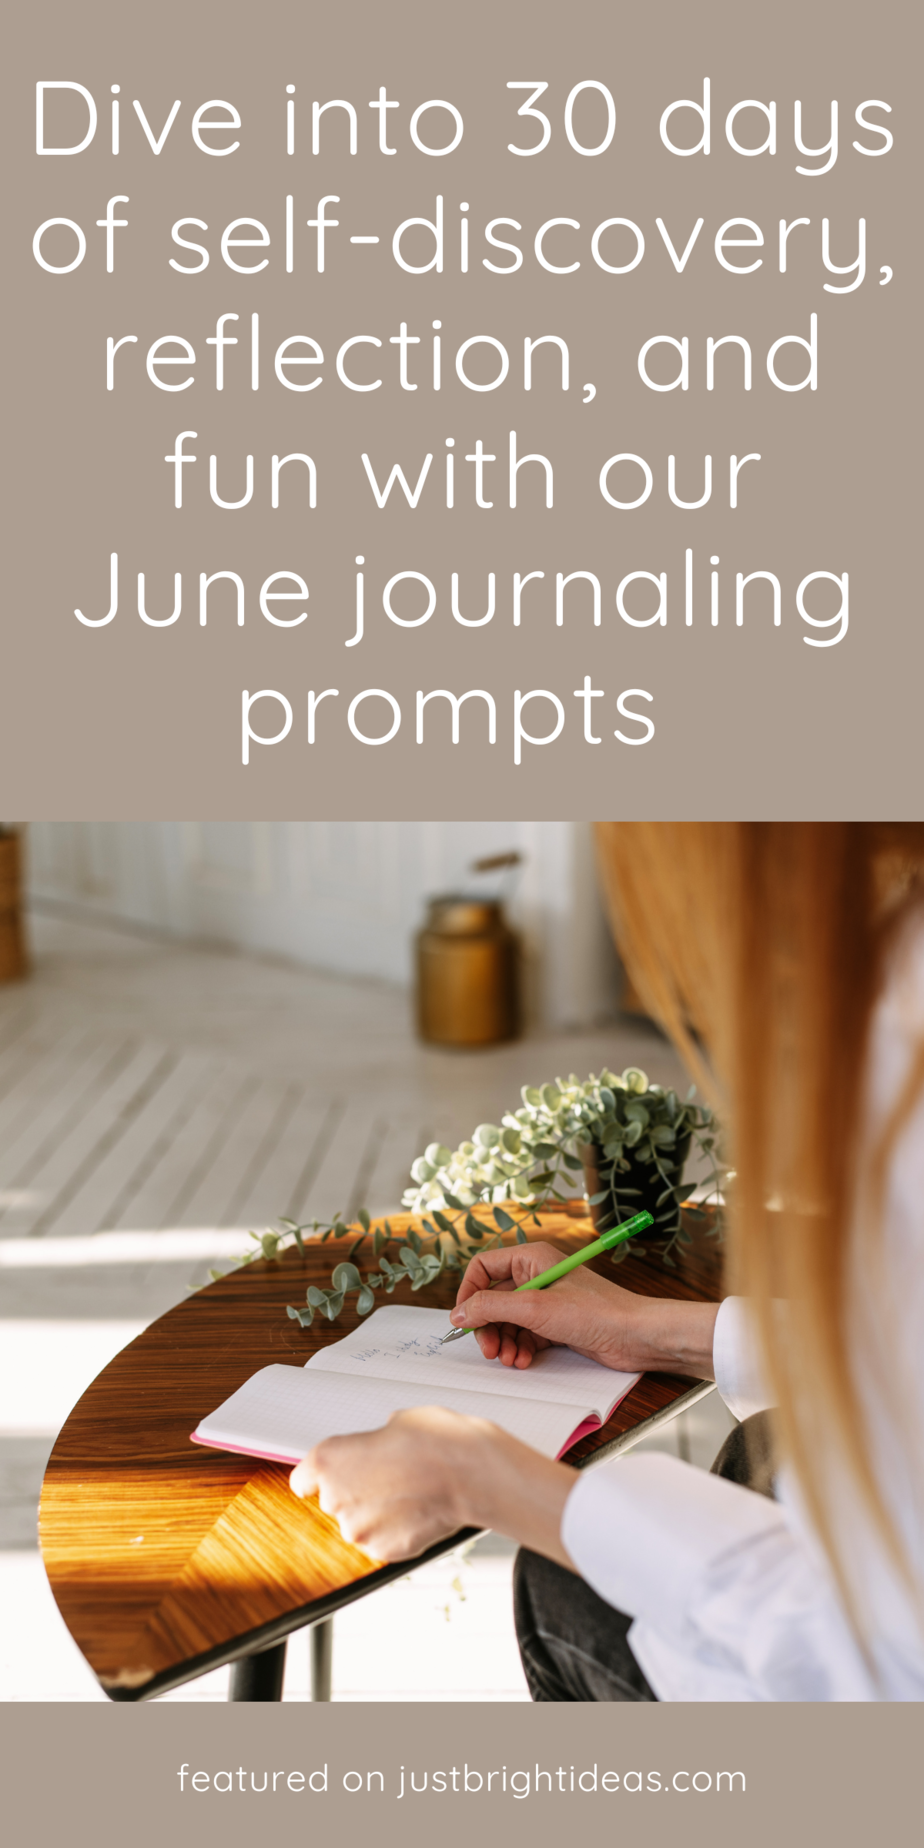 Hello June! 🌿💫 Journaling is such a powerful tool for self-growth and creativity. I’m sharing 30 prompts to inspire you throughout the month. Let’s turn those thoughts into words and make this a summer to remember. Journaling newbies and pros, let’s do this! 🌻📝